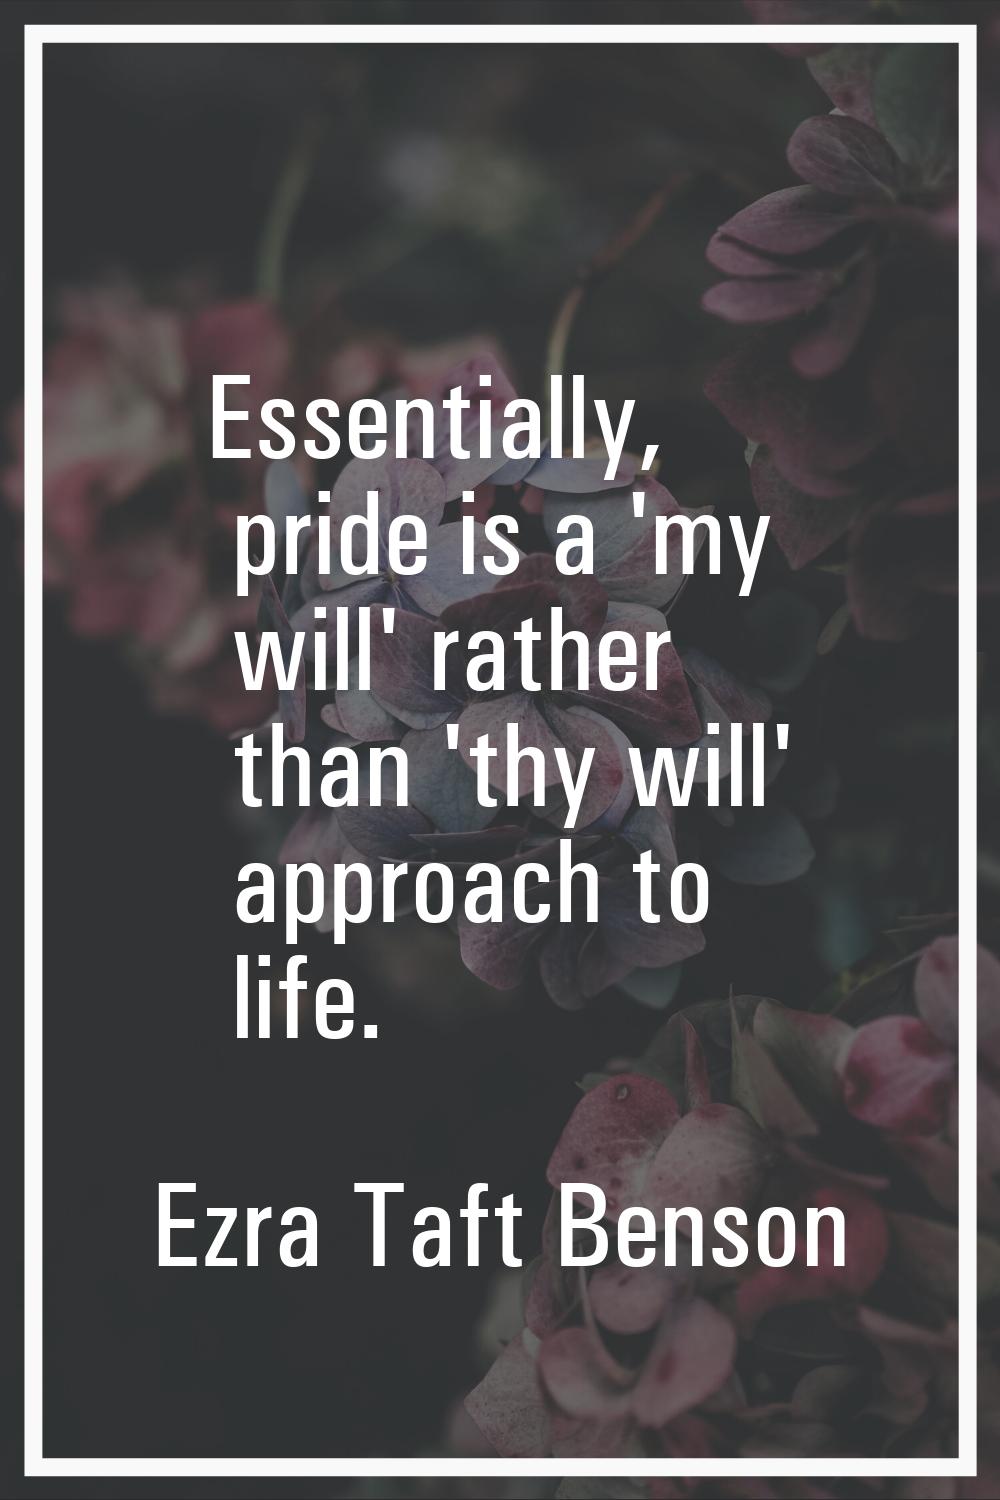 Essentially, pride is a 'my will' rather than 'thy will' approach to life.